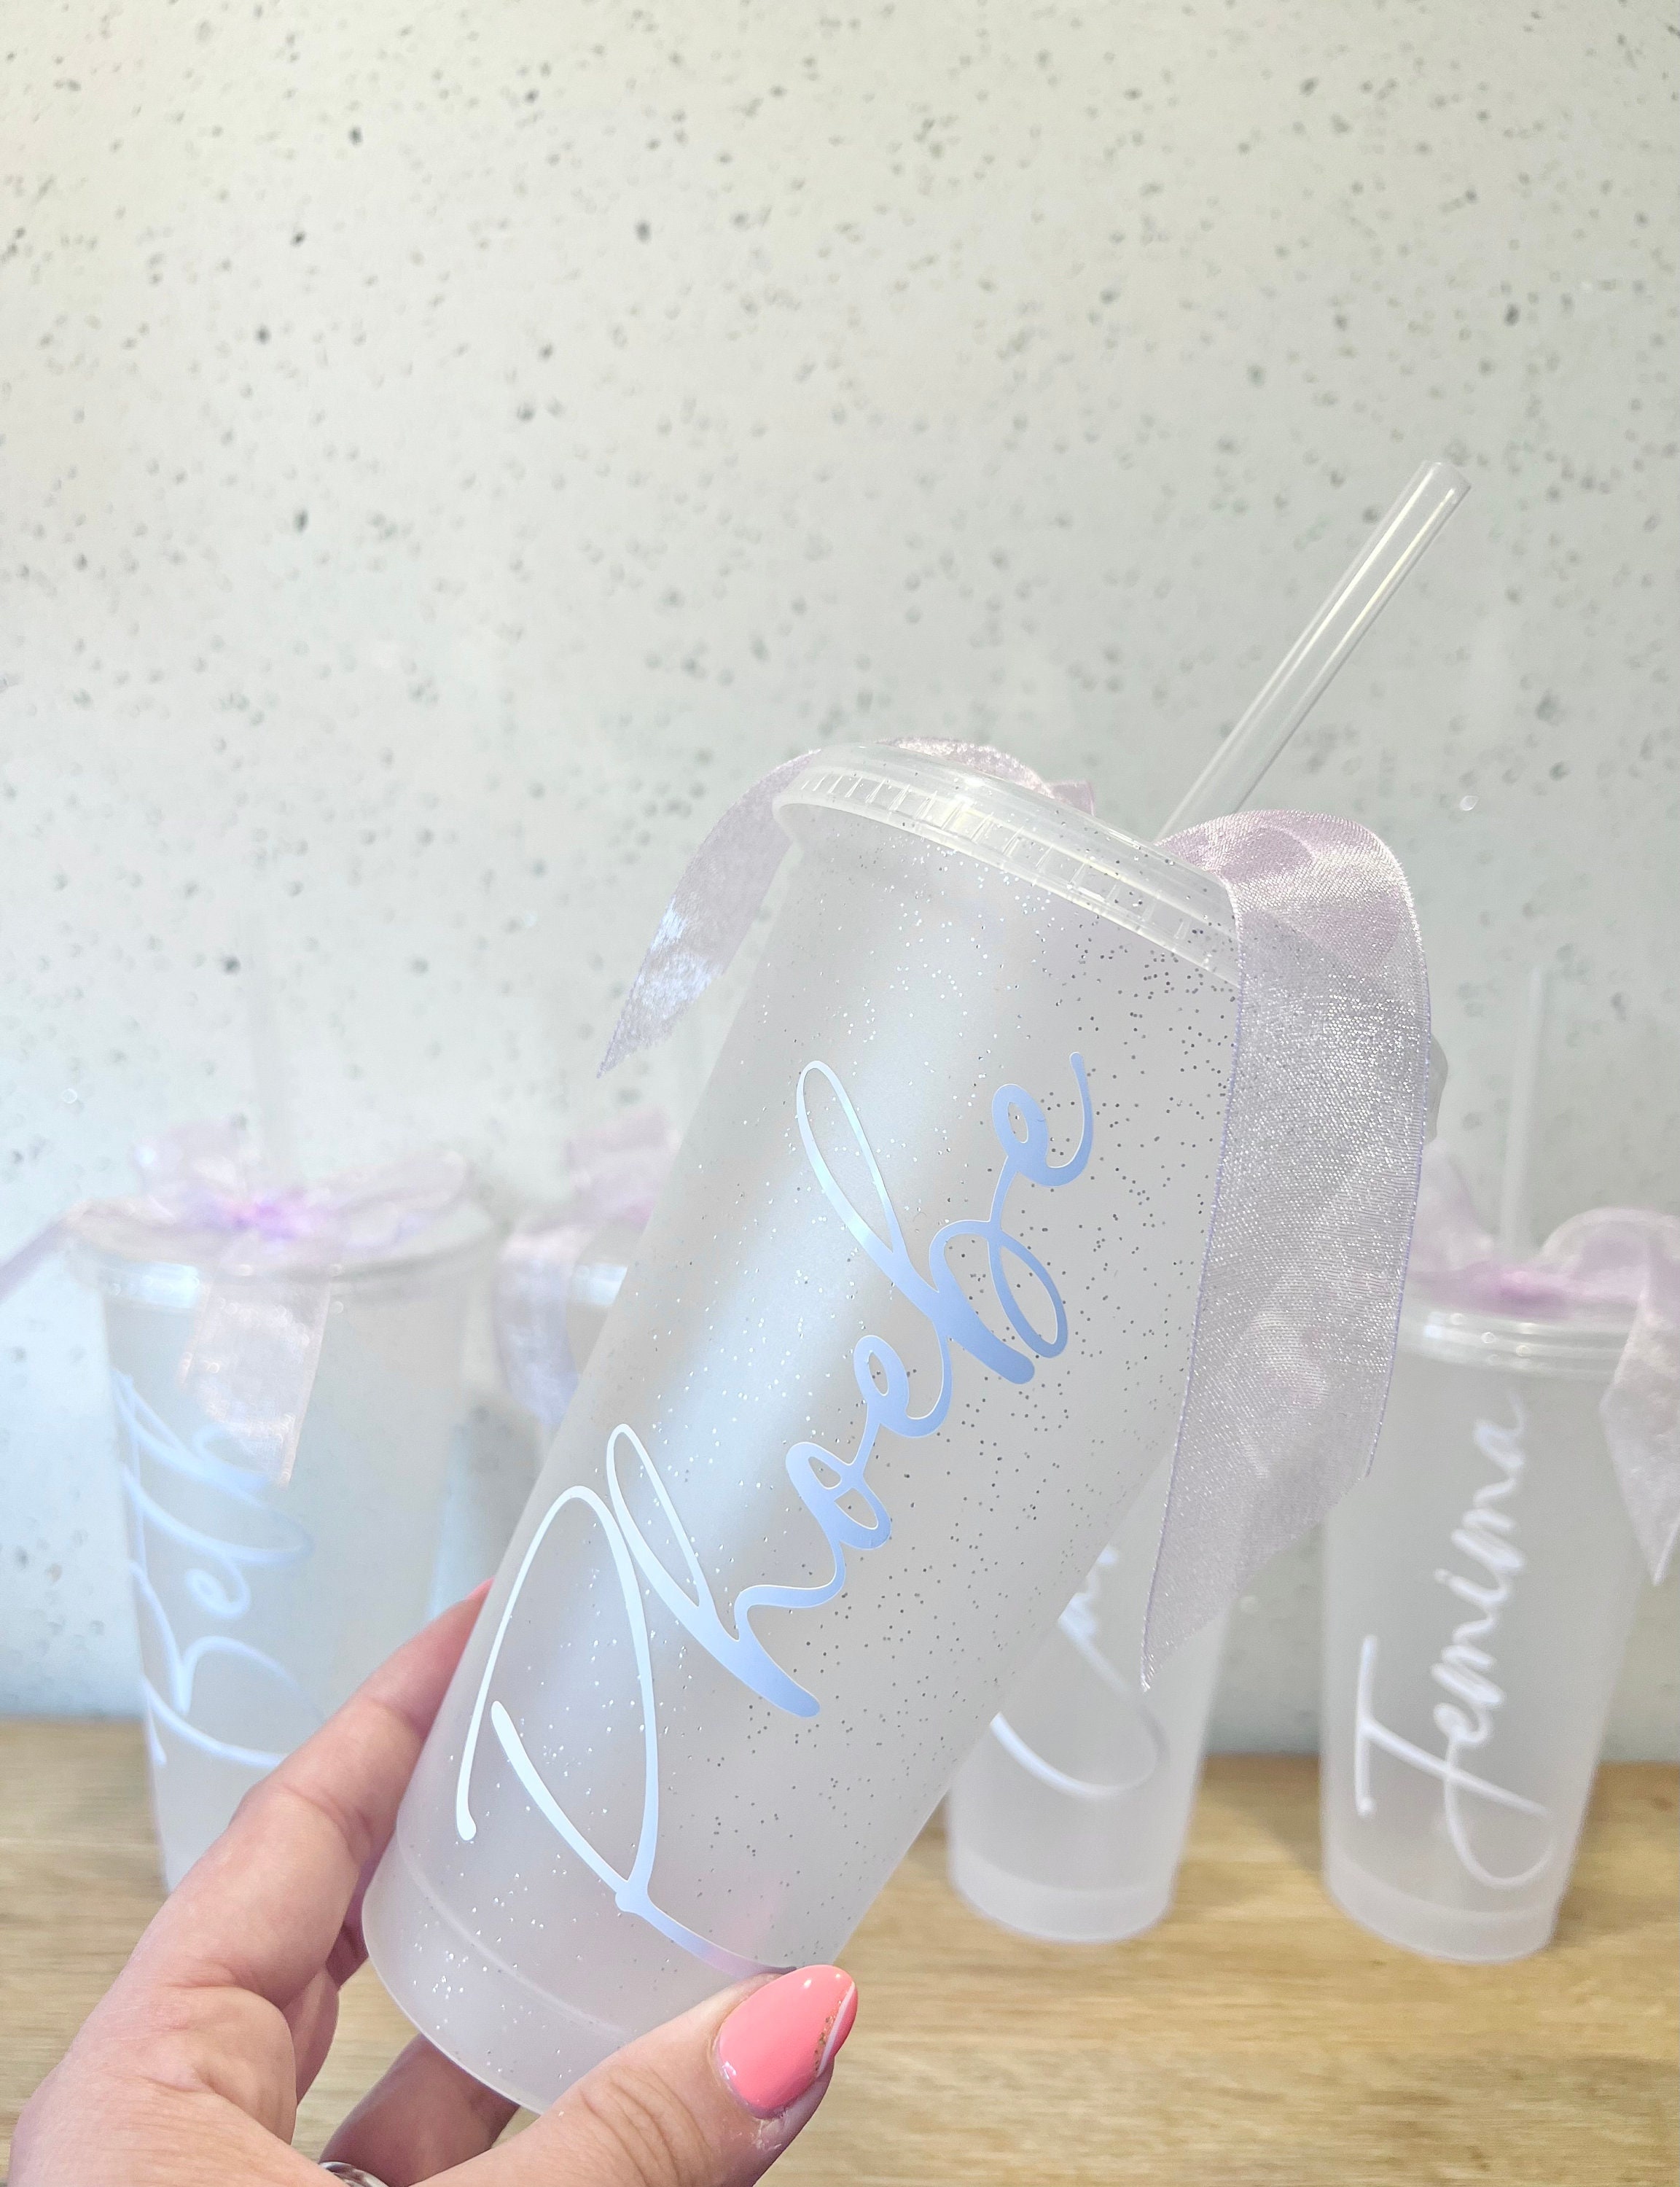 Personalized Drinking Cup With Straw With Desired Name. JGA, Wedding,  Birthday Gift, Bachelorette Party, Party Mug. 